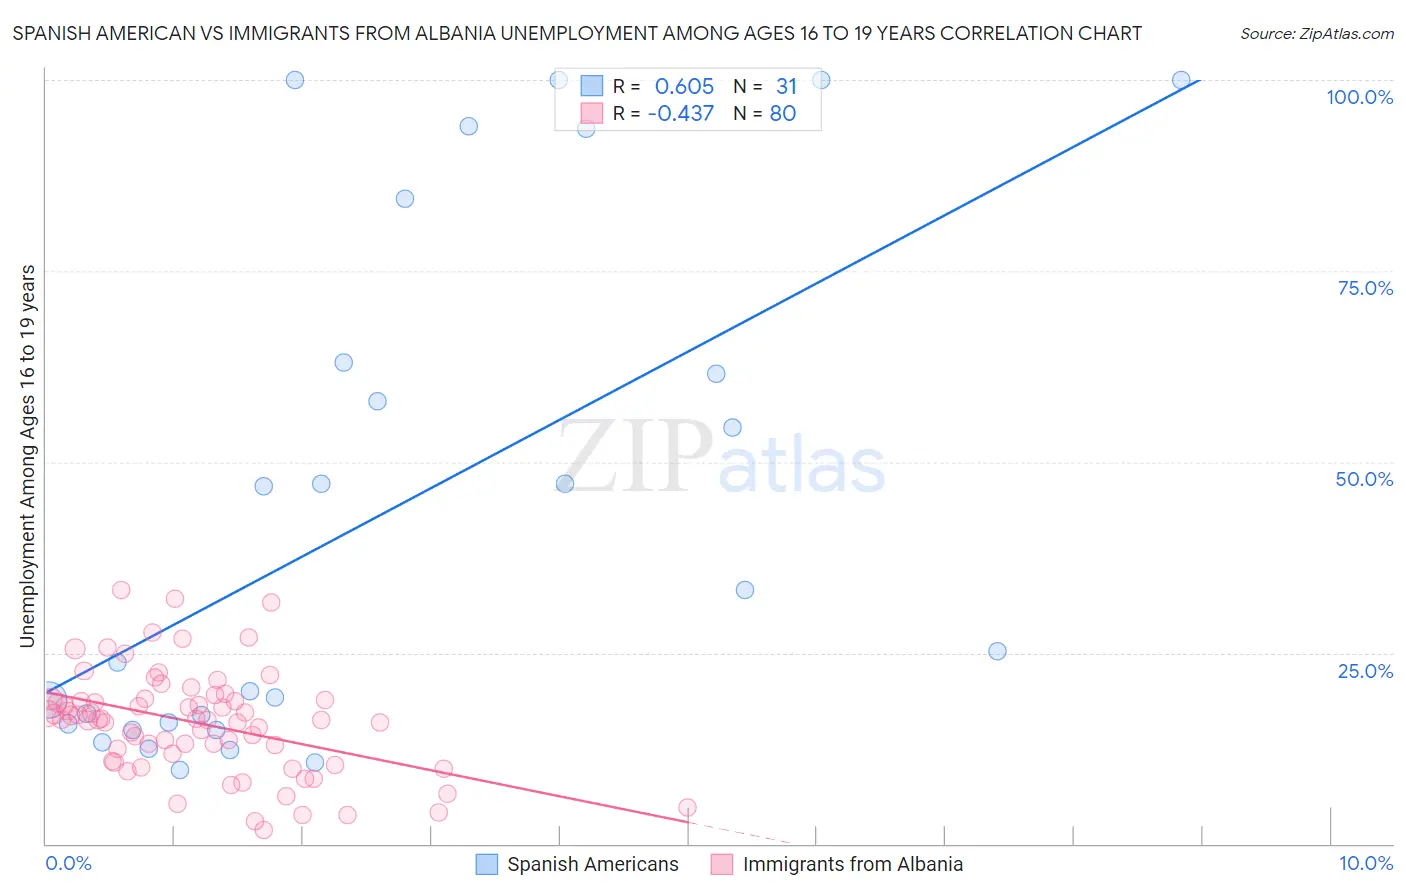 Spanish American vs Immigrants from Albania Unemployment Among Ages 16 to 19 years